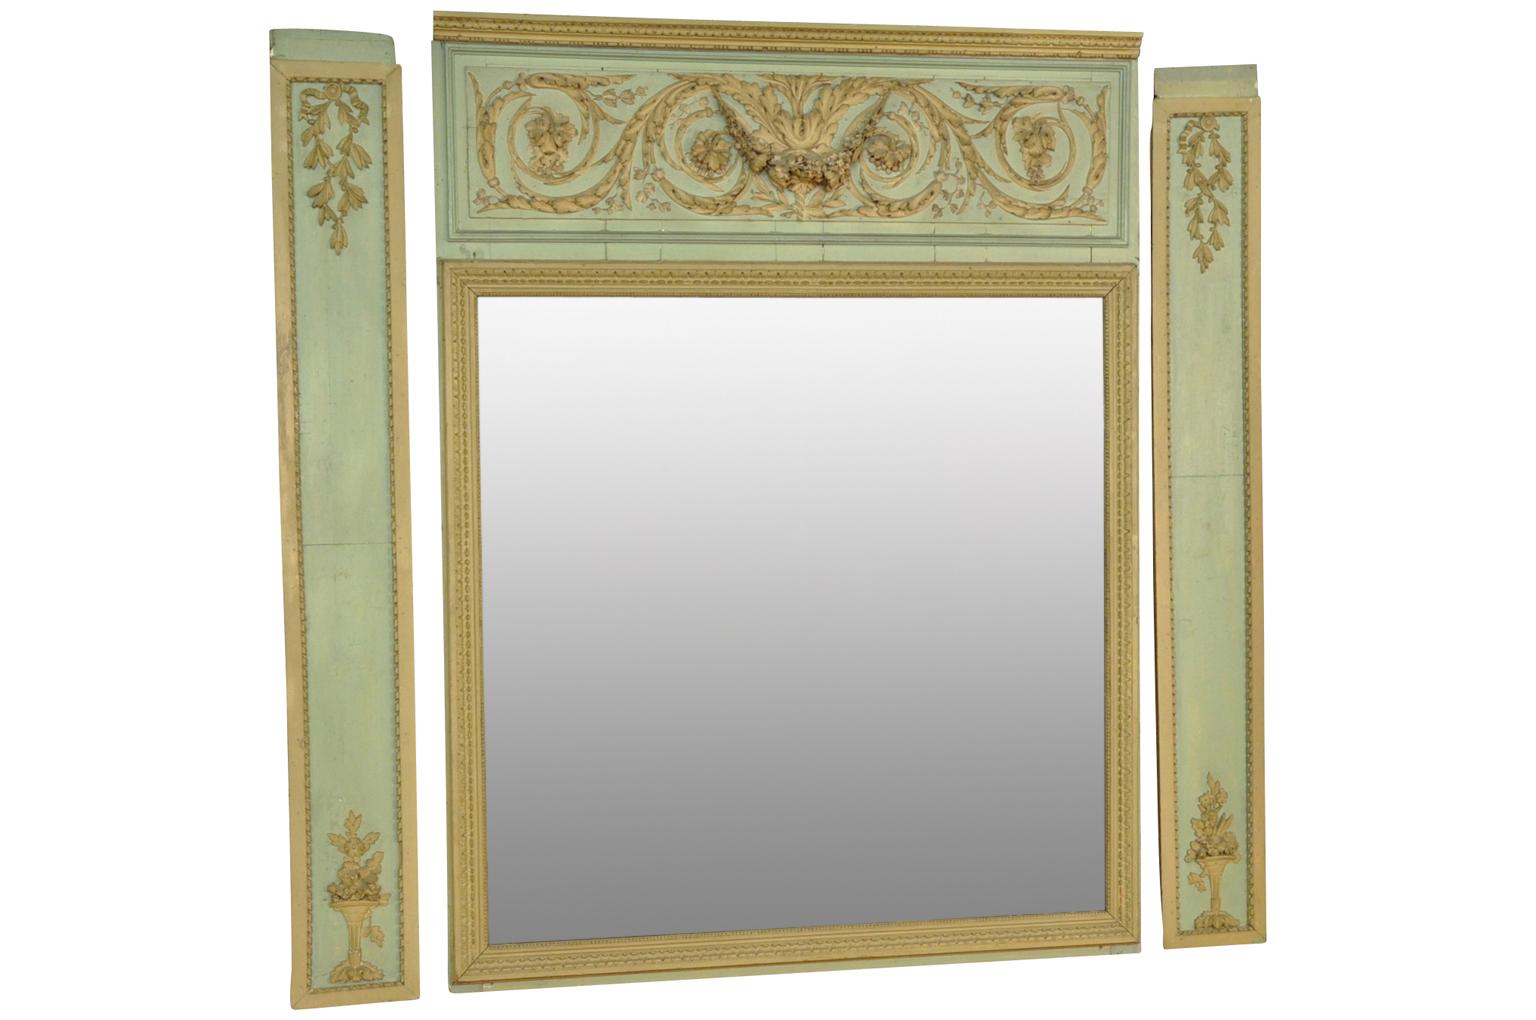 An outstanding and exceptional Louis XVI period trumeau from the South of France. Beautifully constructed from polychromed wood with its original mercury glass mirror. Wonderful carvings decorate the mirror as well as the side panels. Please note